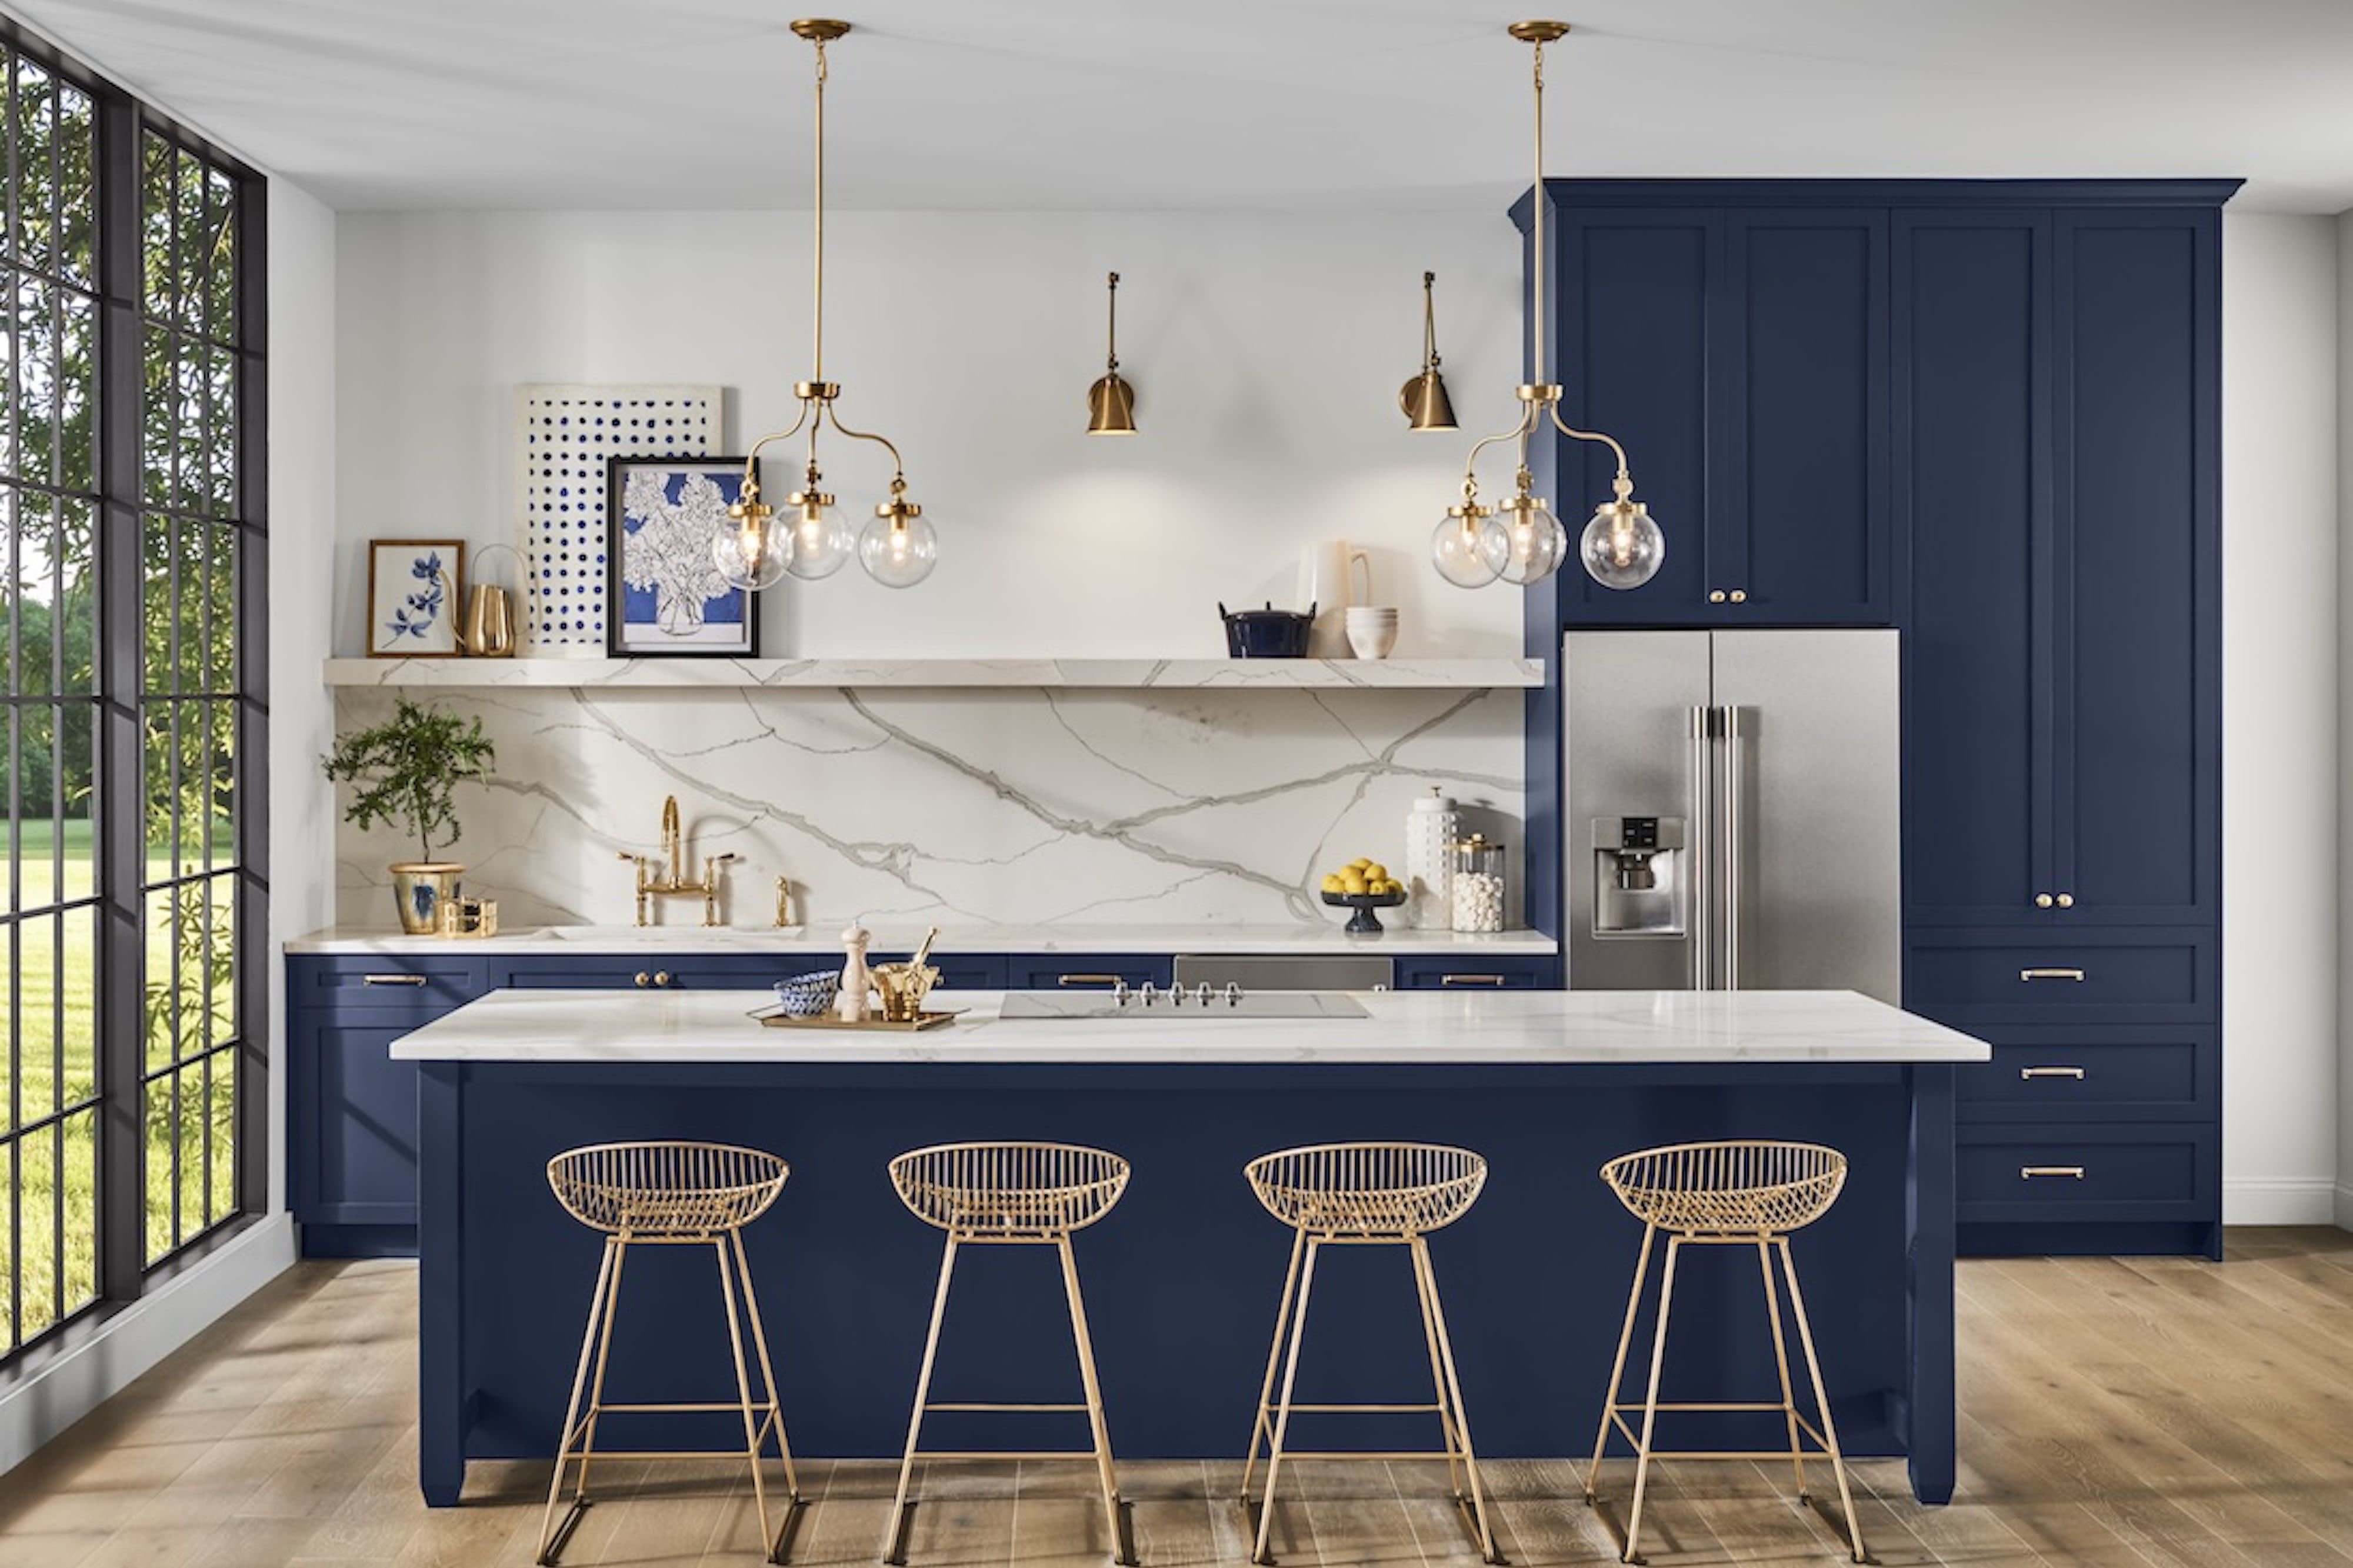 7 Paint Colors We Re Loving For Kitchen Cabinets In 2020